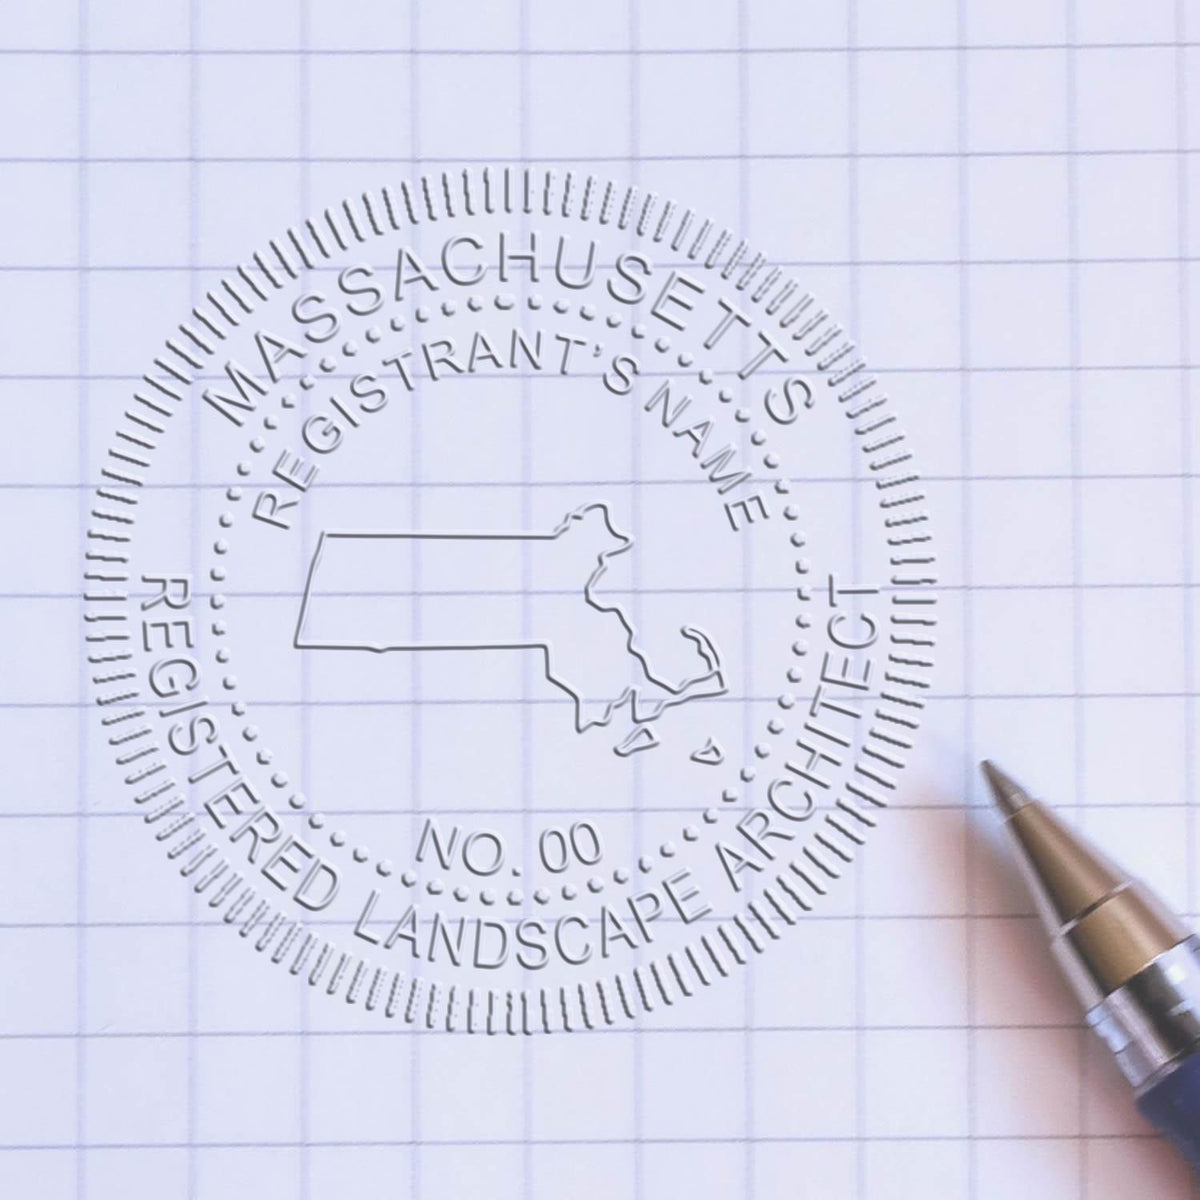 A stamped imprint of the Gift Massachusetts Landscape Architect Seal in this stylish lifestyle photo, setting the tone for a unique and personalized product.